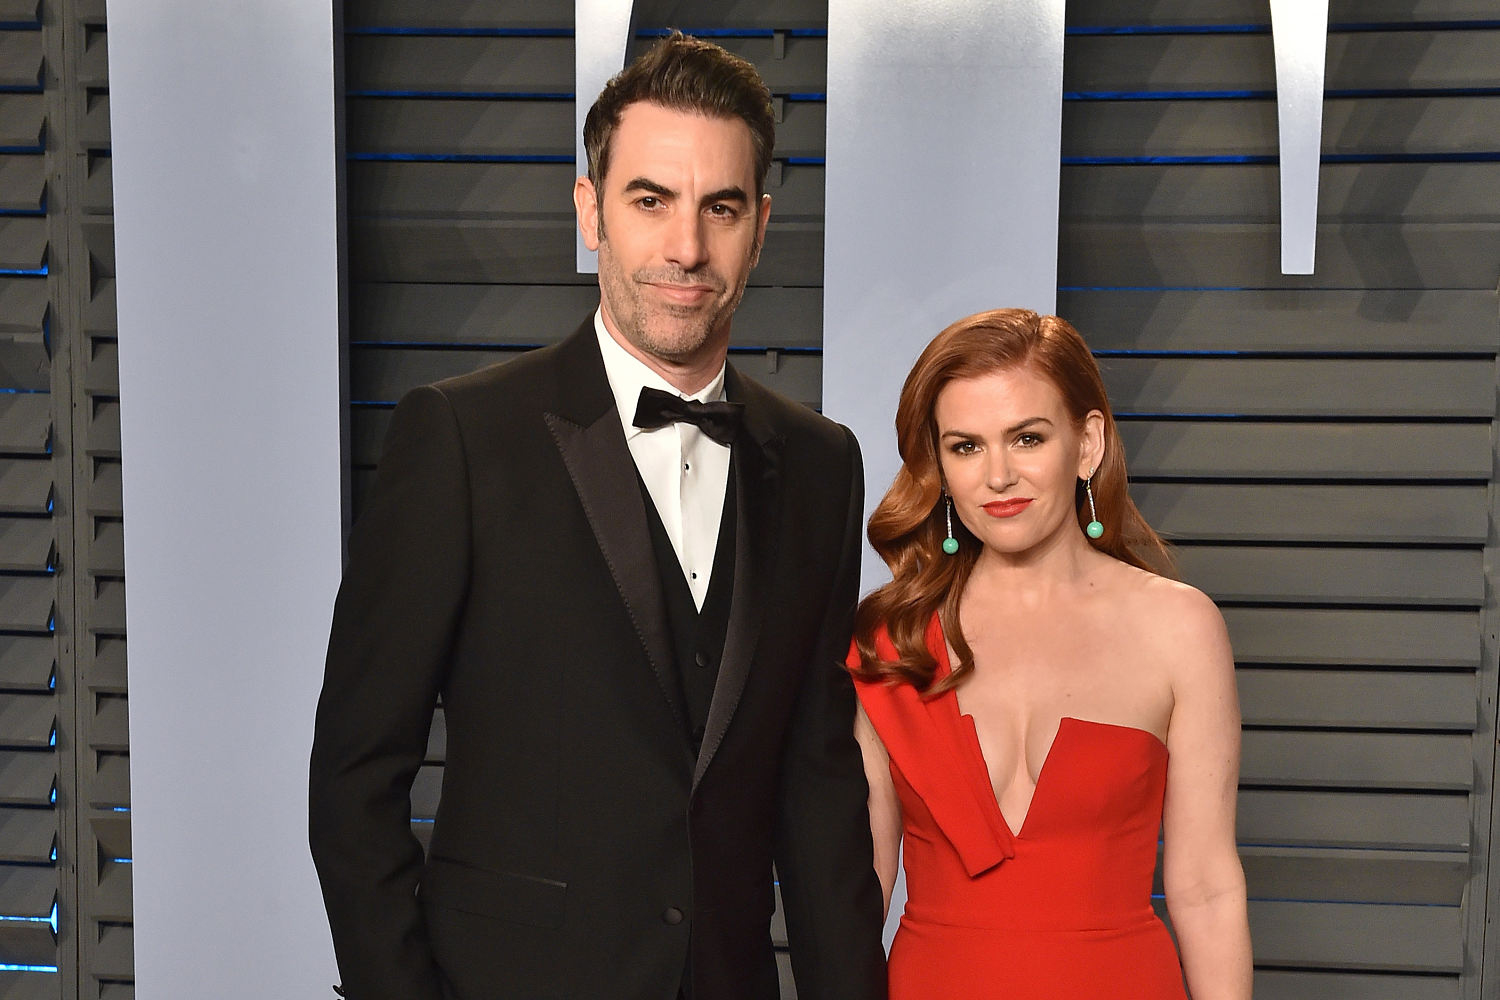 Sacha Baron Cohen and Isla Fisher divorcing after 14 years of marriage 